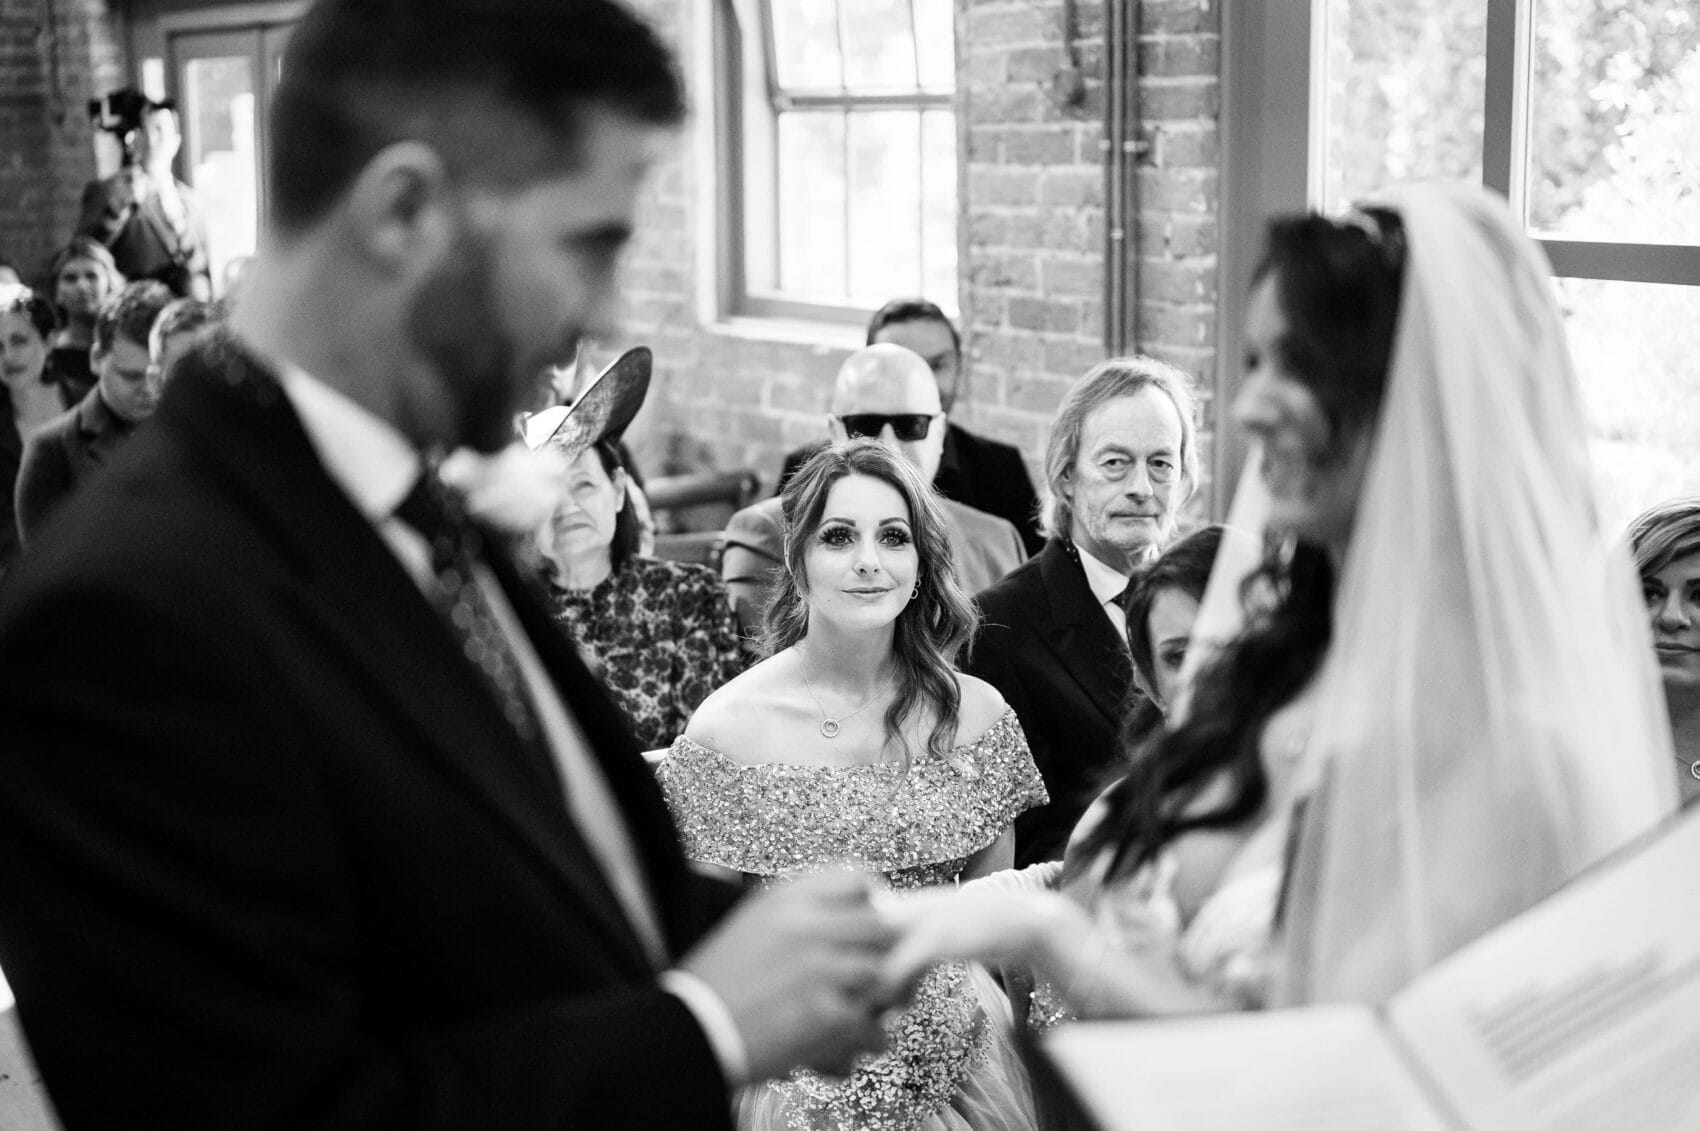 Bridesmaid watched the couple exchange rings